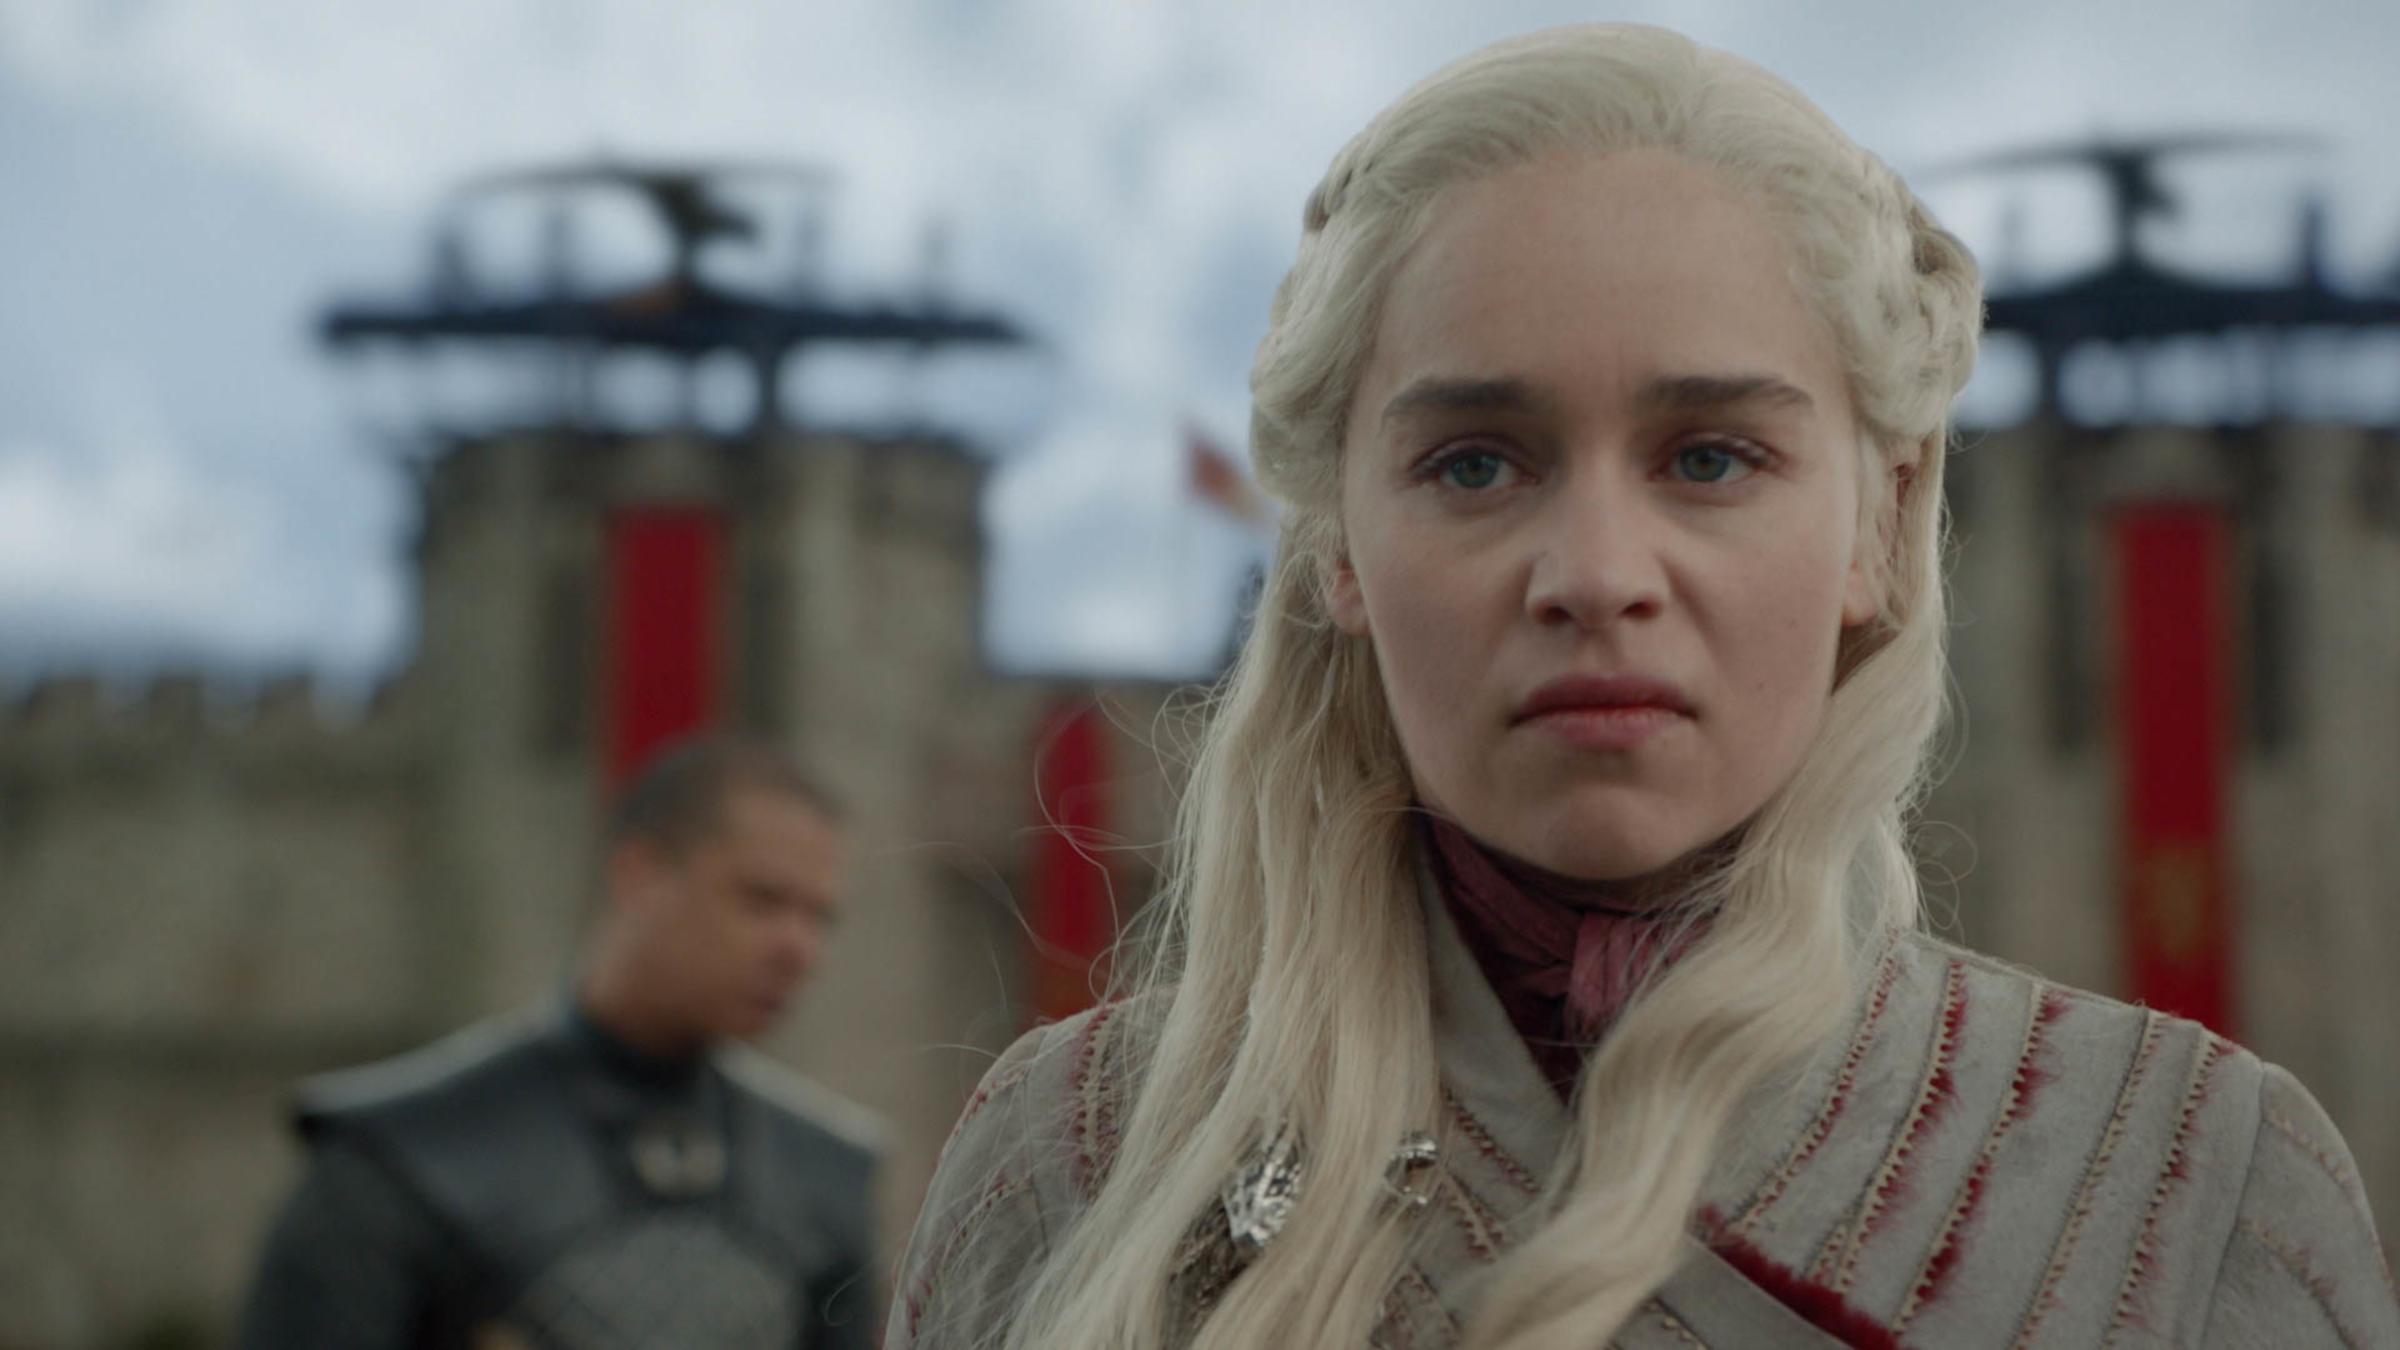 Daenerys reacts to the death of Missandei in Game of Thrones season 8 episode 4